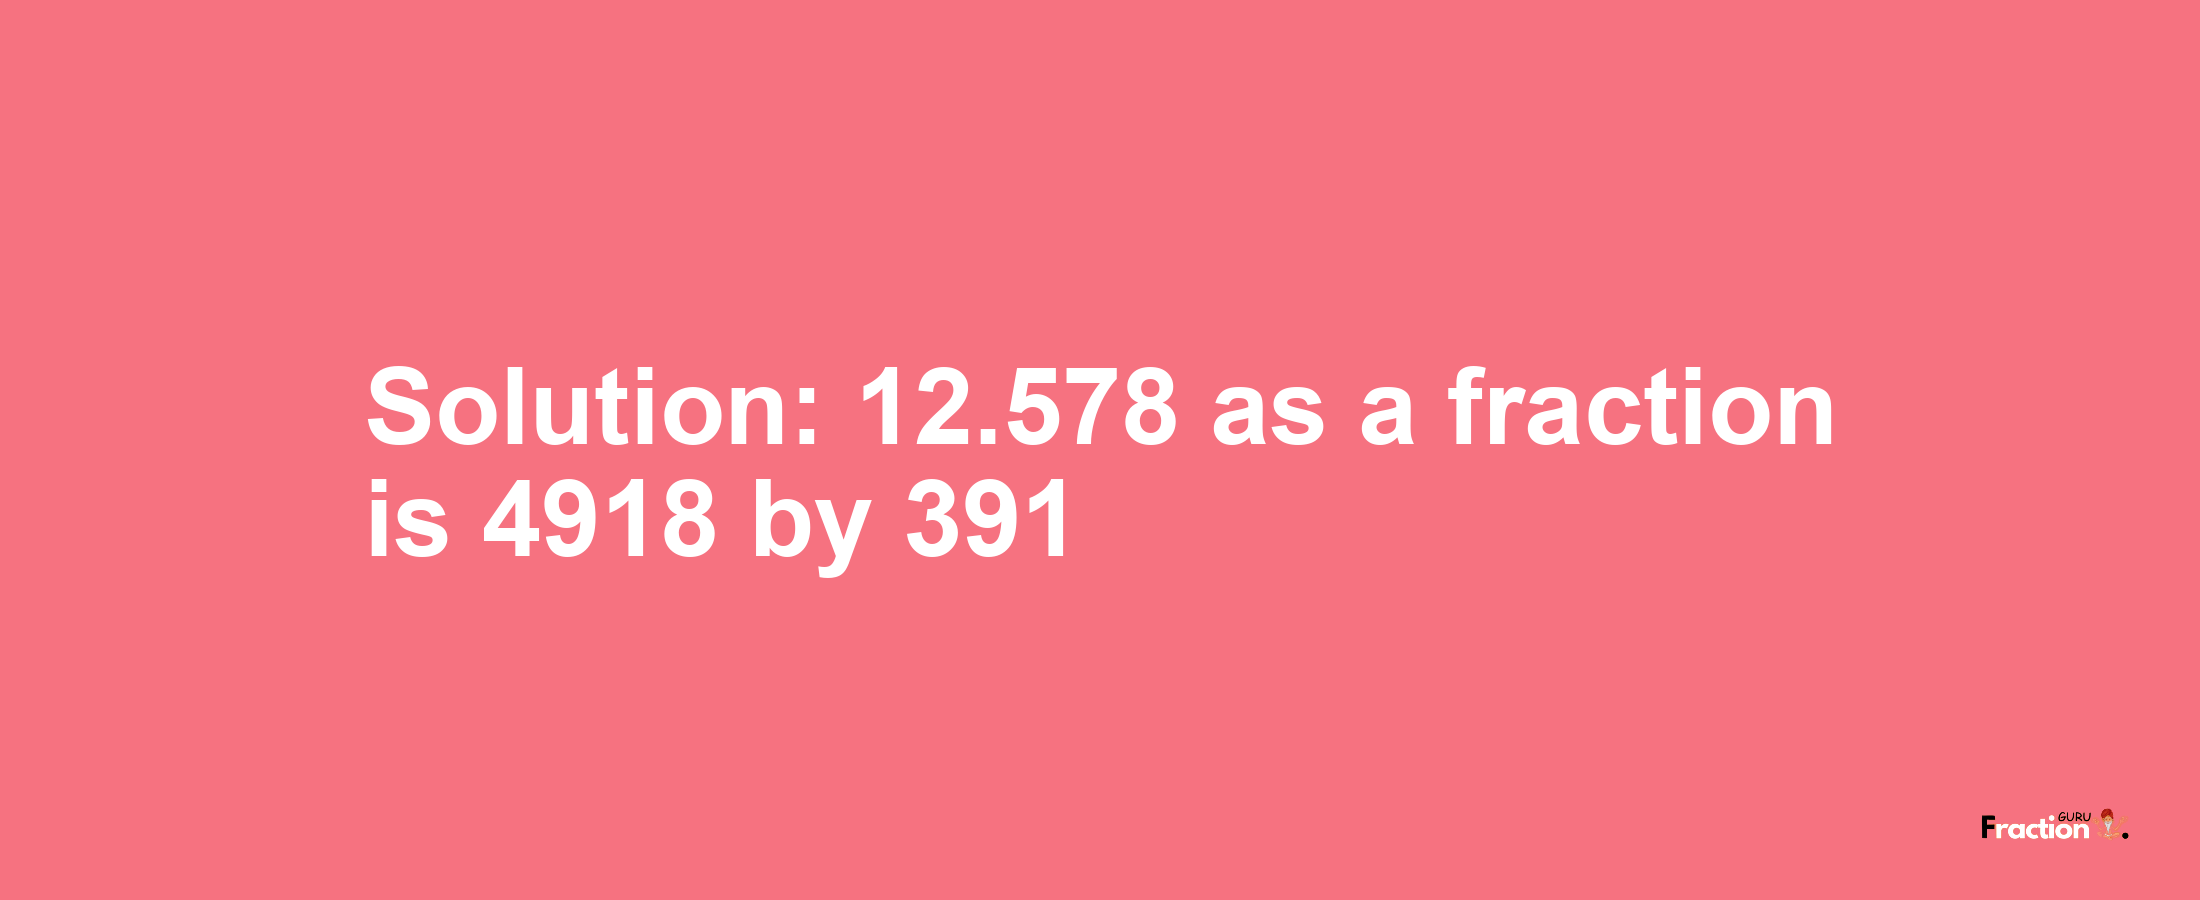 Solution:12.578 as a fraction is 4918/391